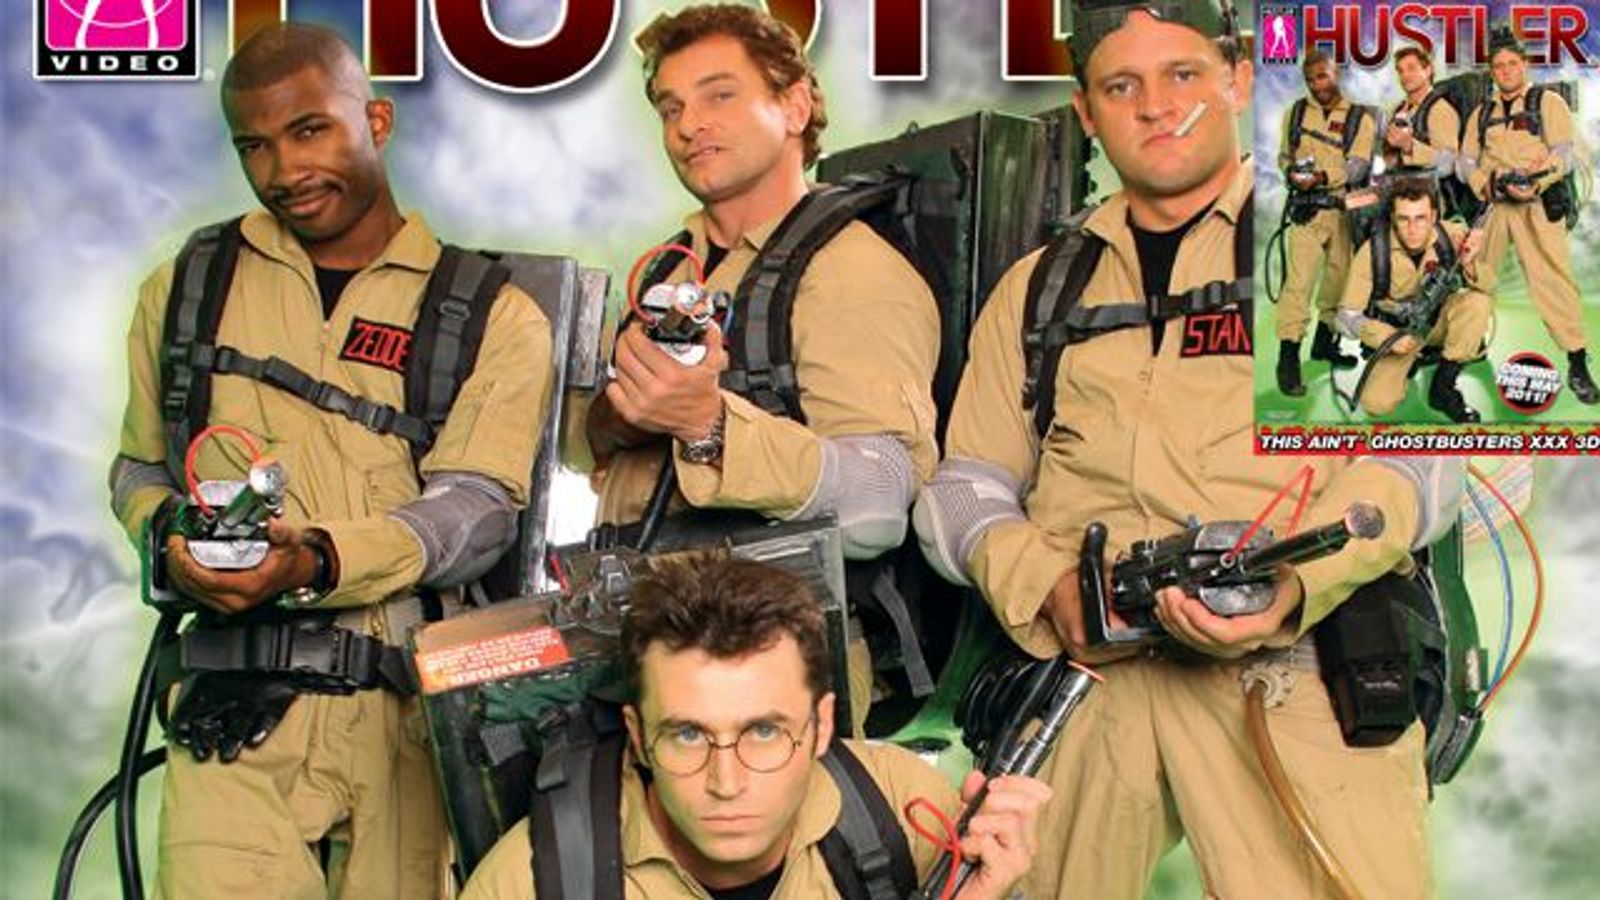 Hustler's This Ain't Ghostbusters XXX Parody Now Available | AVN